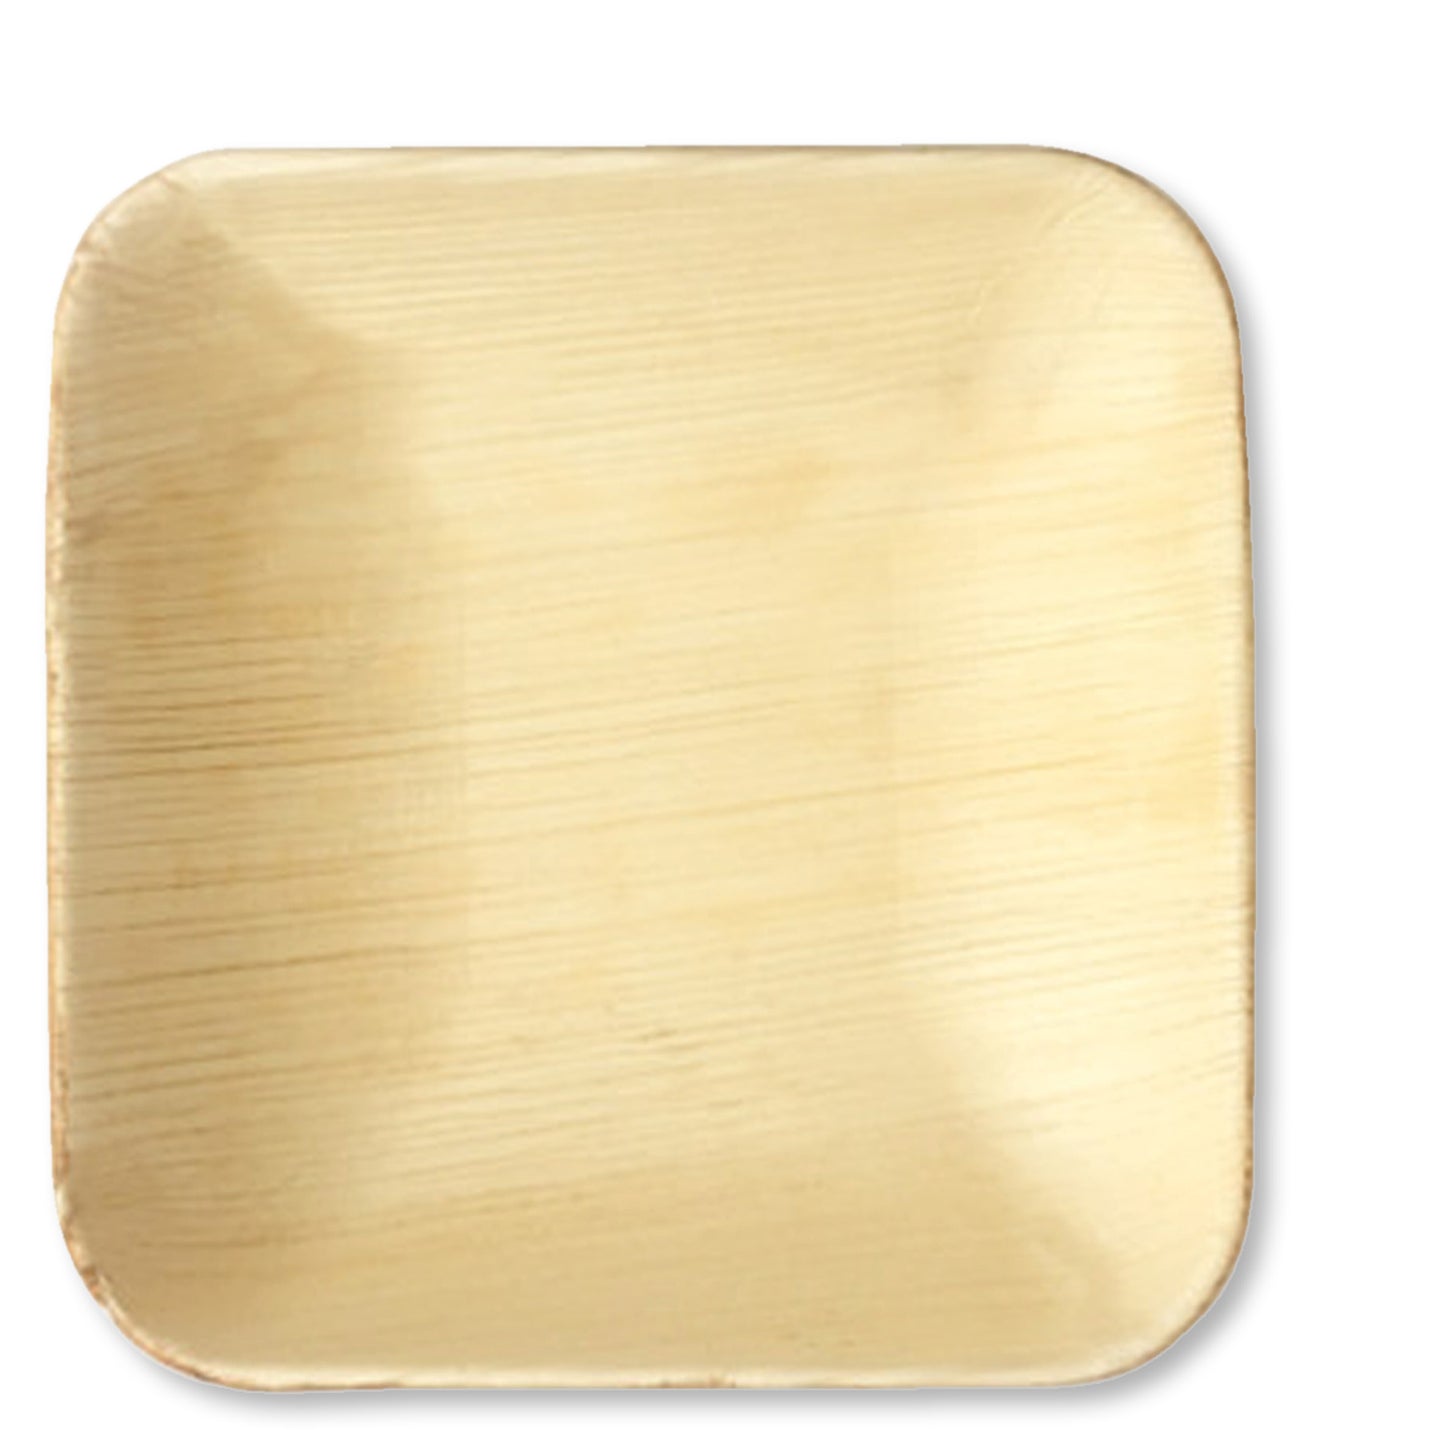 Disposable Stylish Palm Leaf Plates are a unique alternative to other disposable tableware on the market.  Chemical-free / Non-toxic• Biodegradable / Compostable• Microwave Safe• Oven Safe• Refrigerator safe. From Palm Leaf Plates NZ